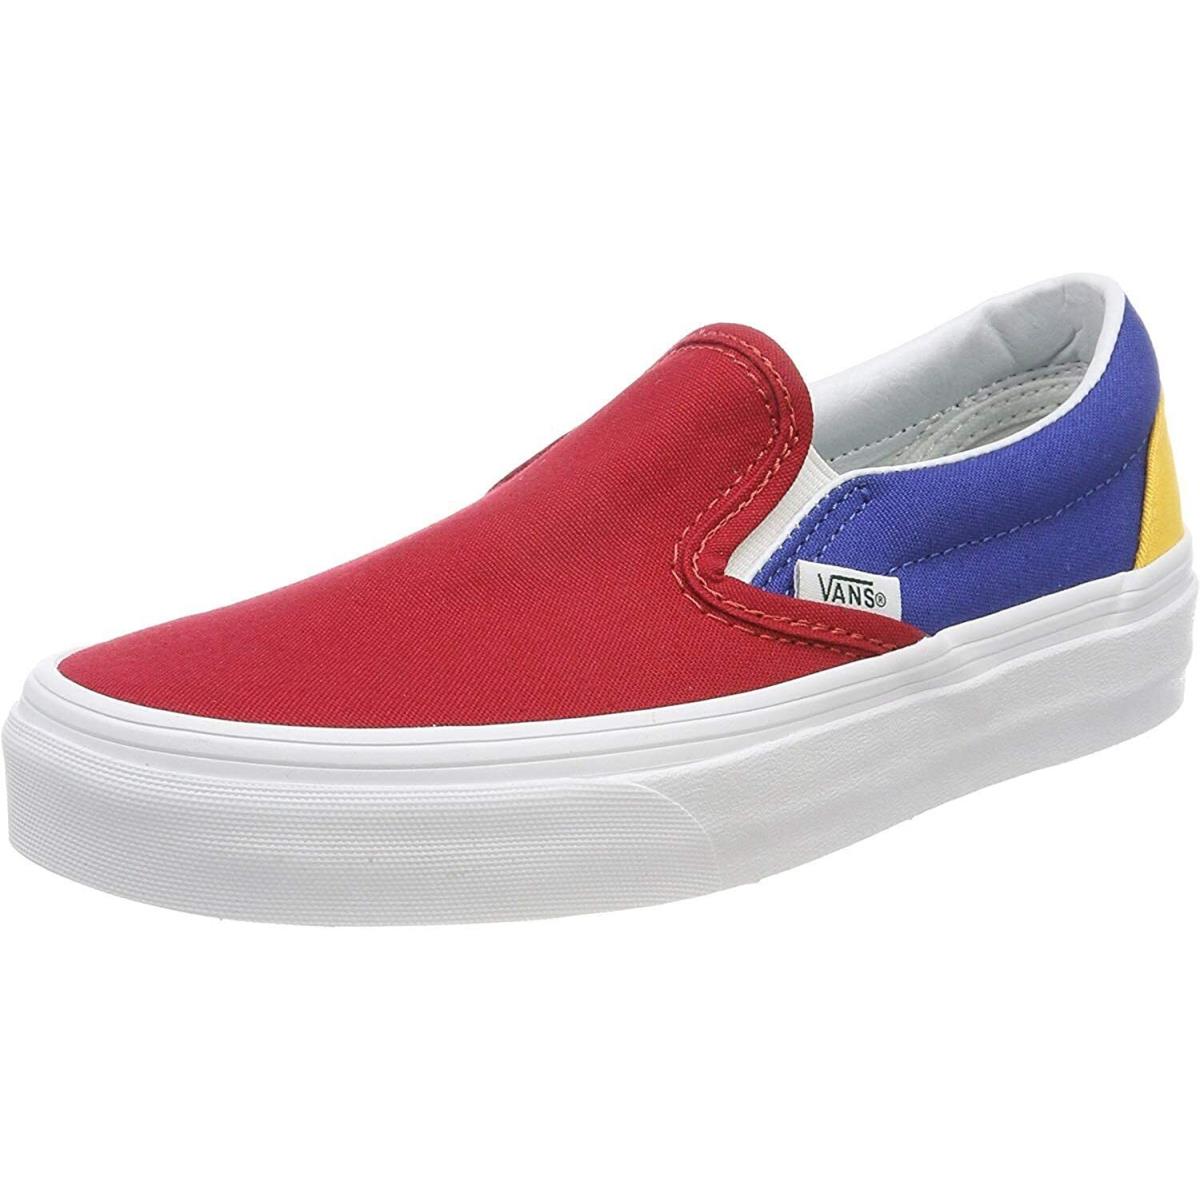 Vans Classic Slip ON Yacht Club Red Blue Men`s 8.5 12 13 Shoes sk8 Skate - Red